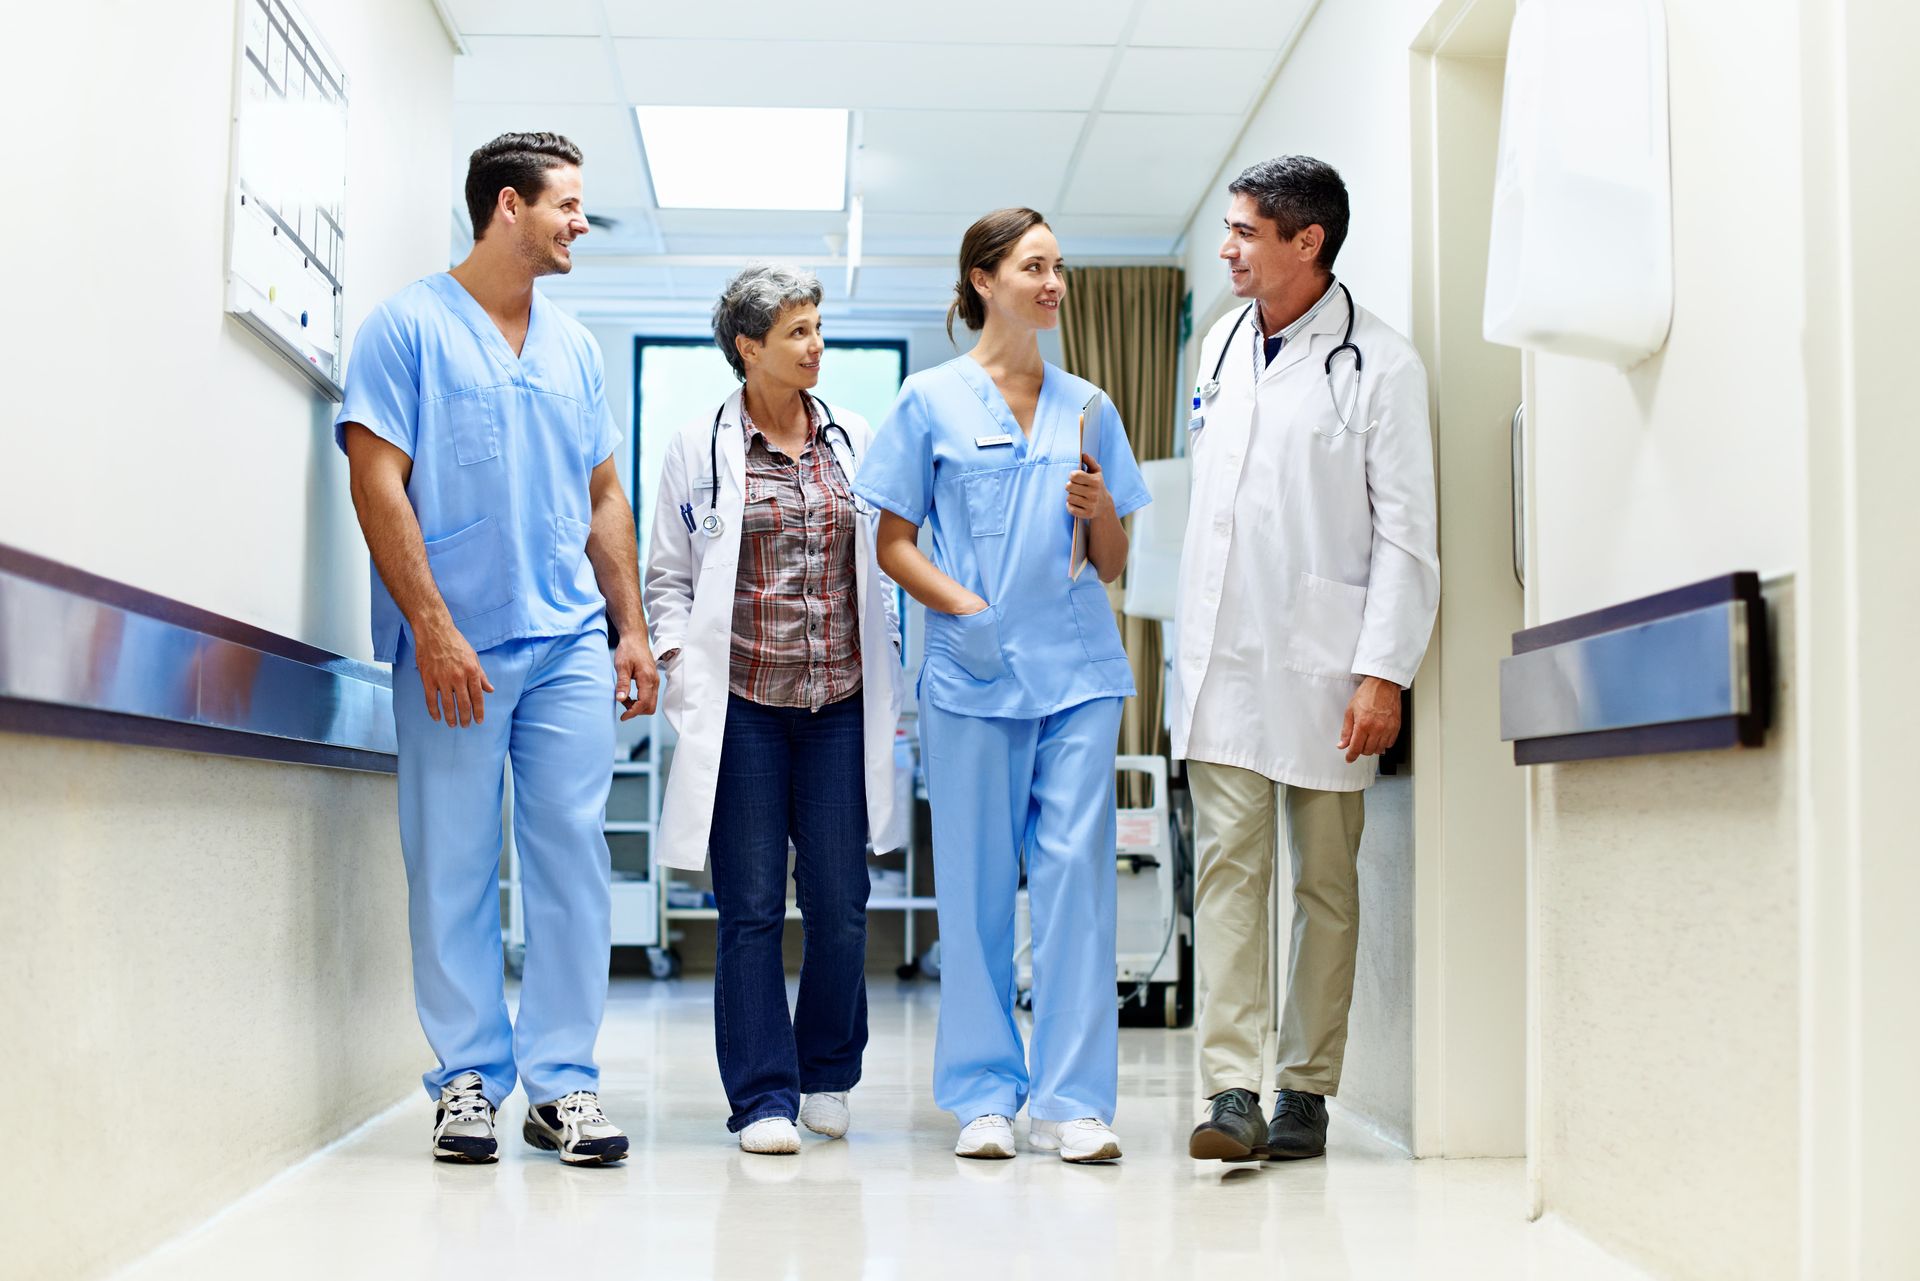 Main features of hospital inventory management software